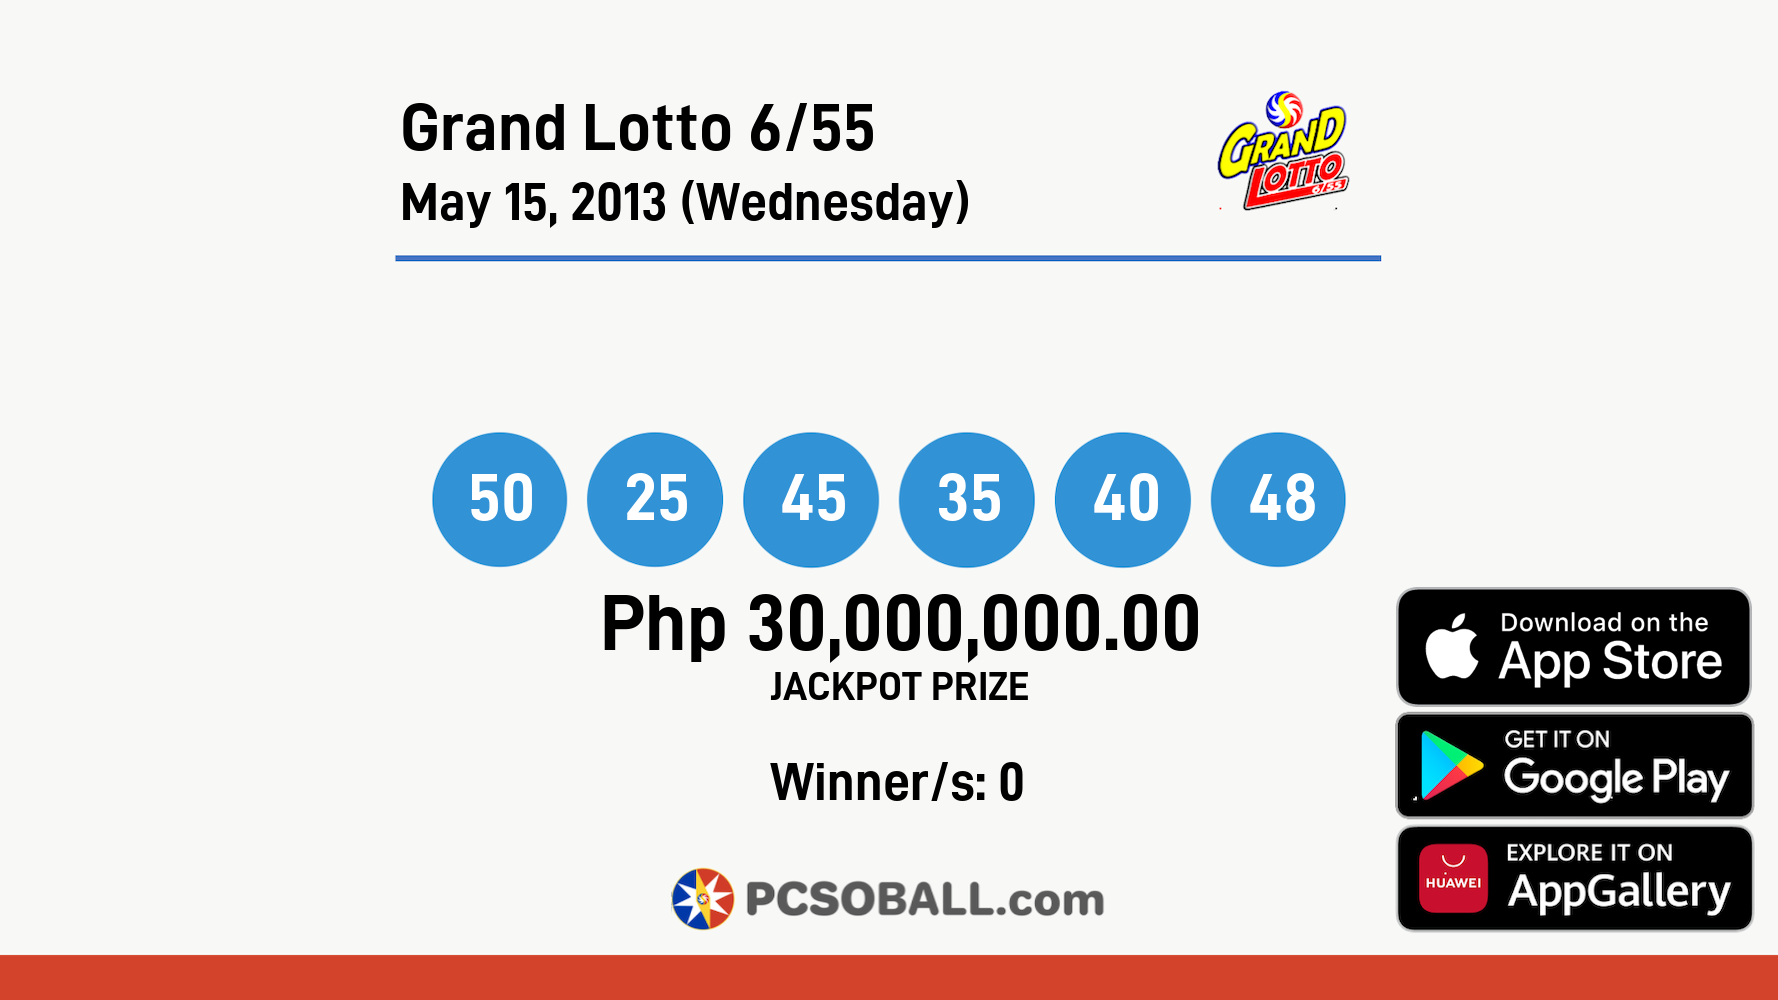 Grand Lotto 6/55 May 15, 2013 (Wednesday) Result